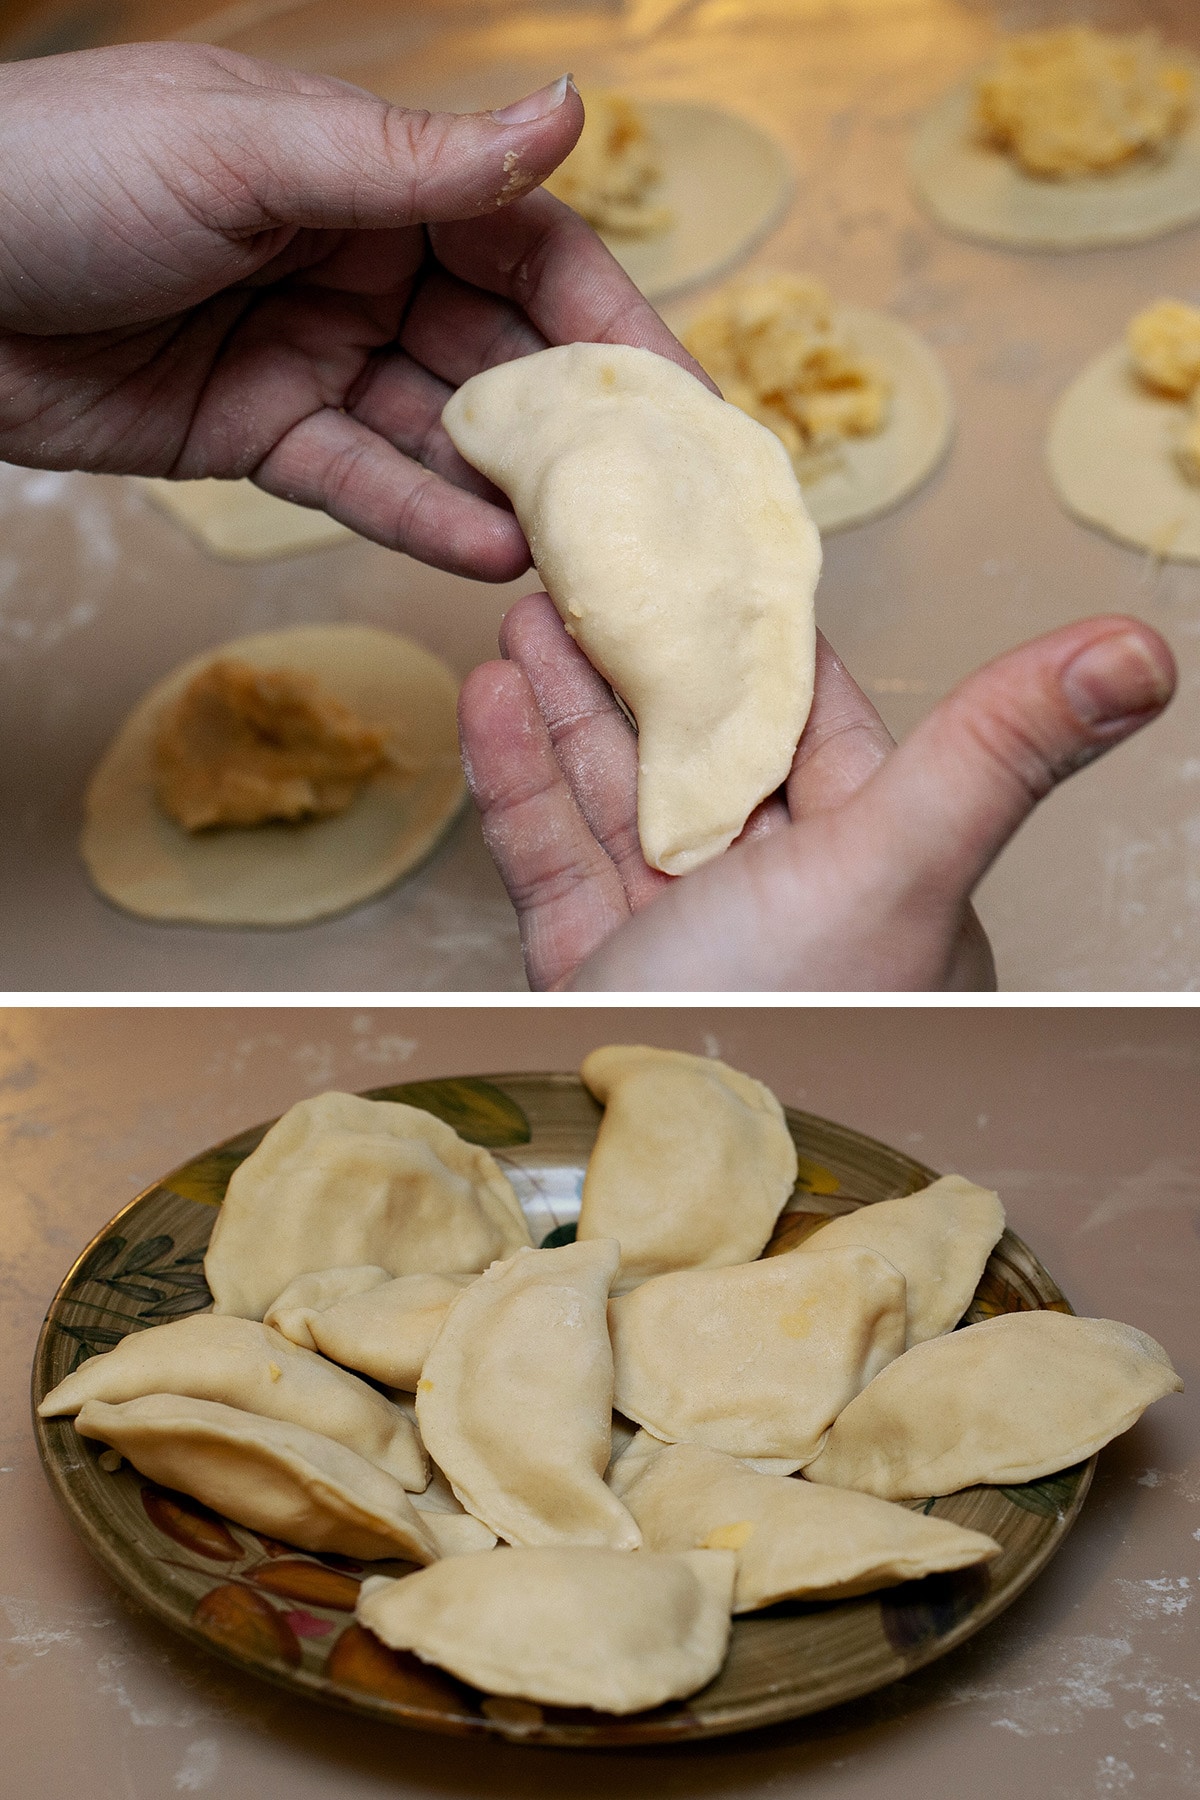 A two part image showing hands holding a foldered perogy, and a plate of freshly formed perogies.